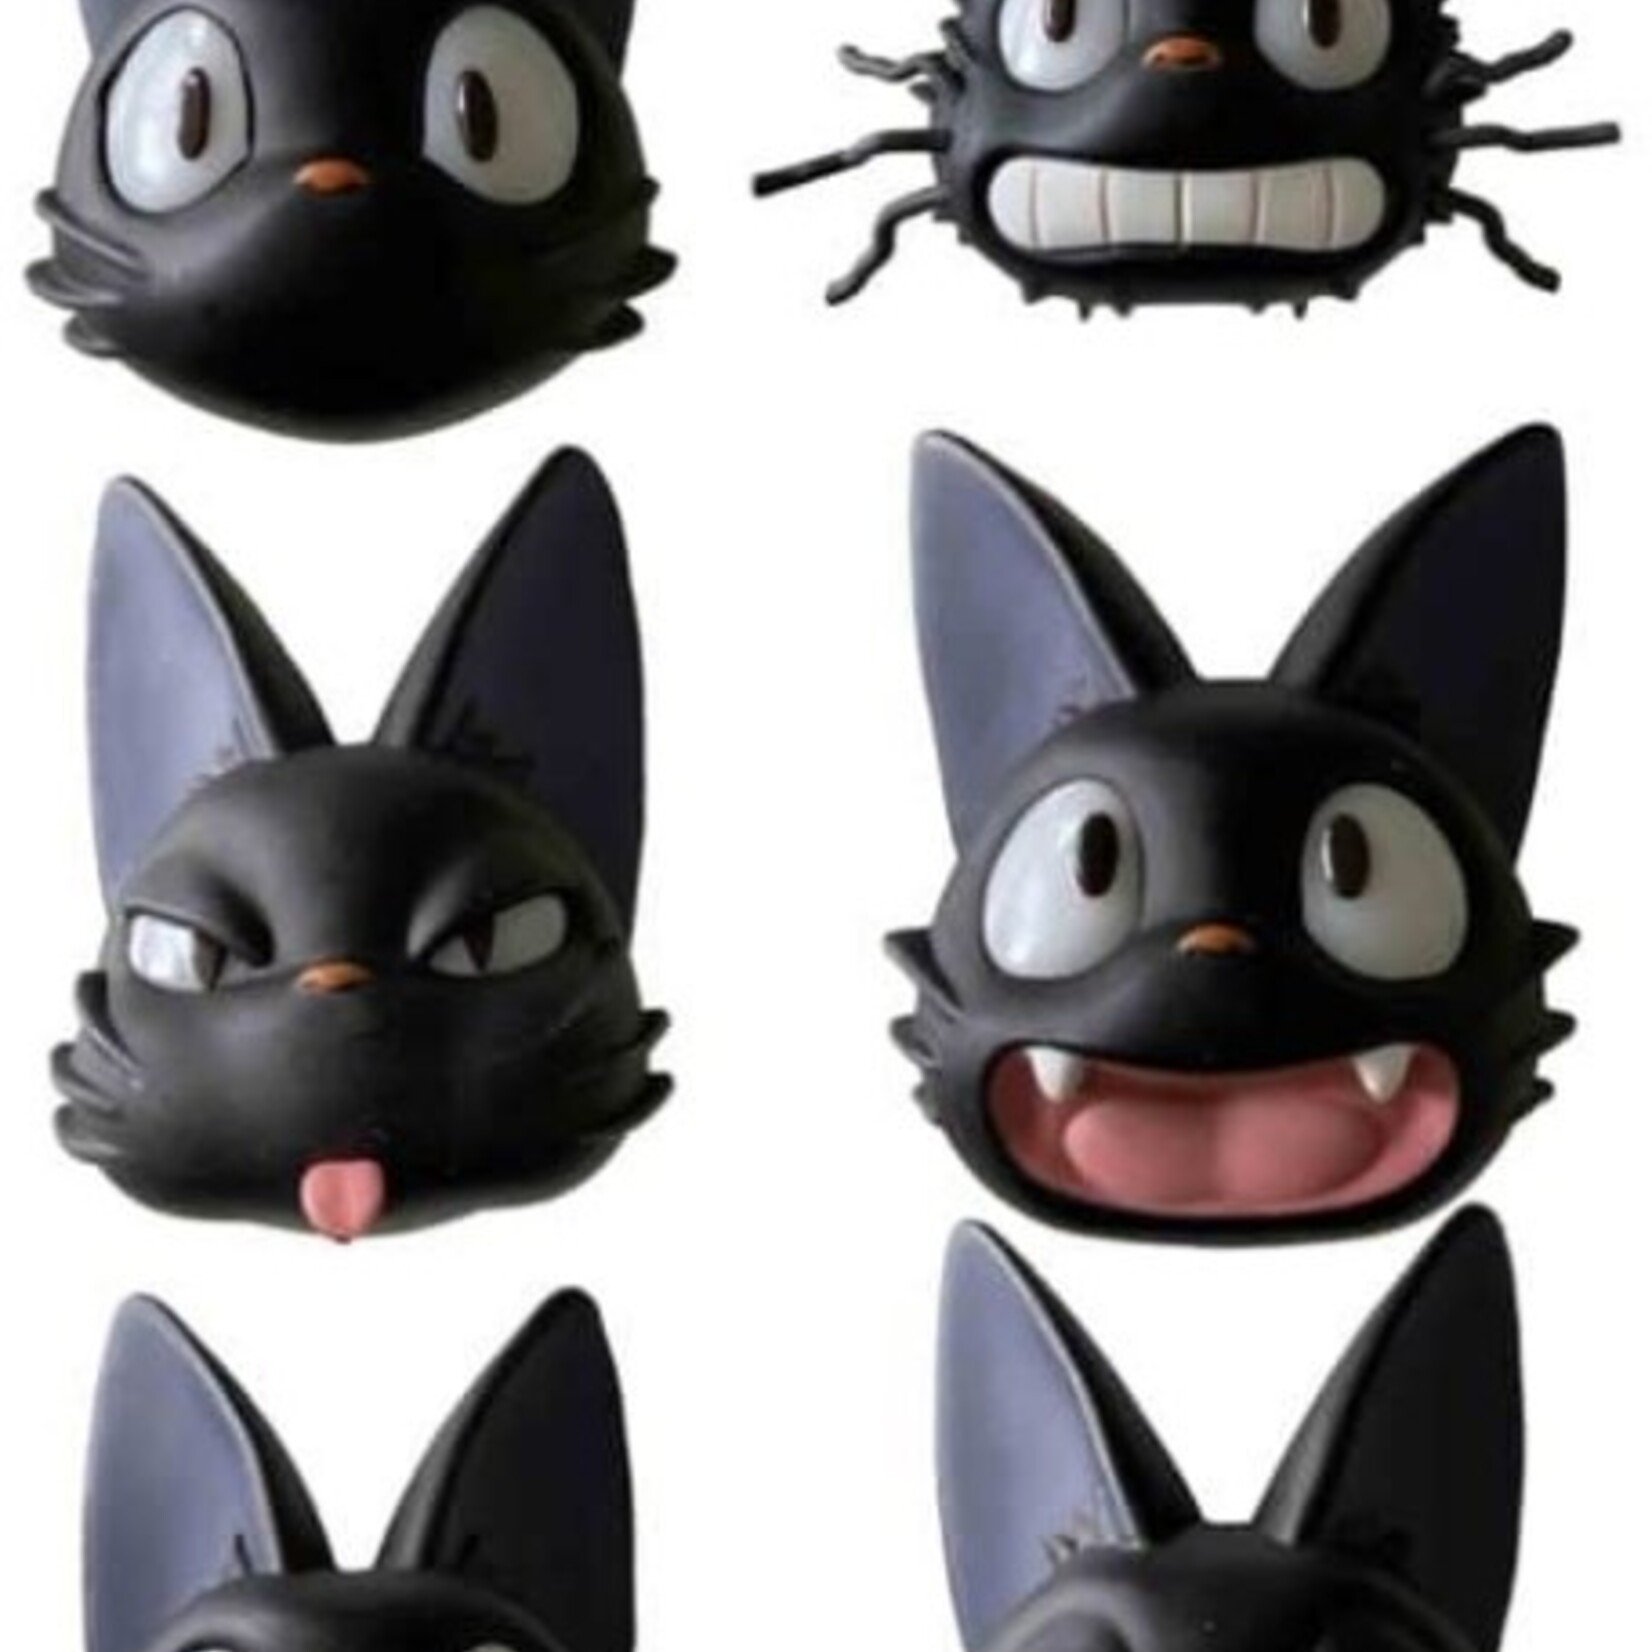 Clever Idiots Kiki's Delivery Service 3D Magnet Blind Box (Jiji)